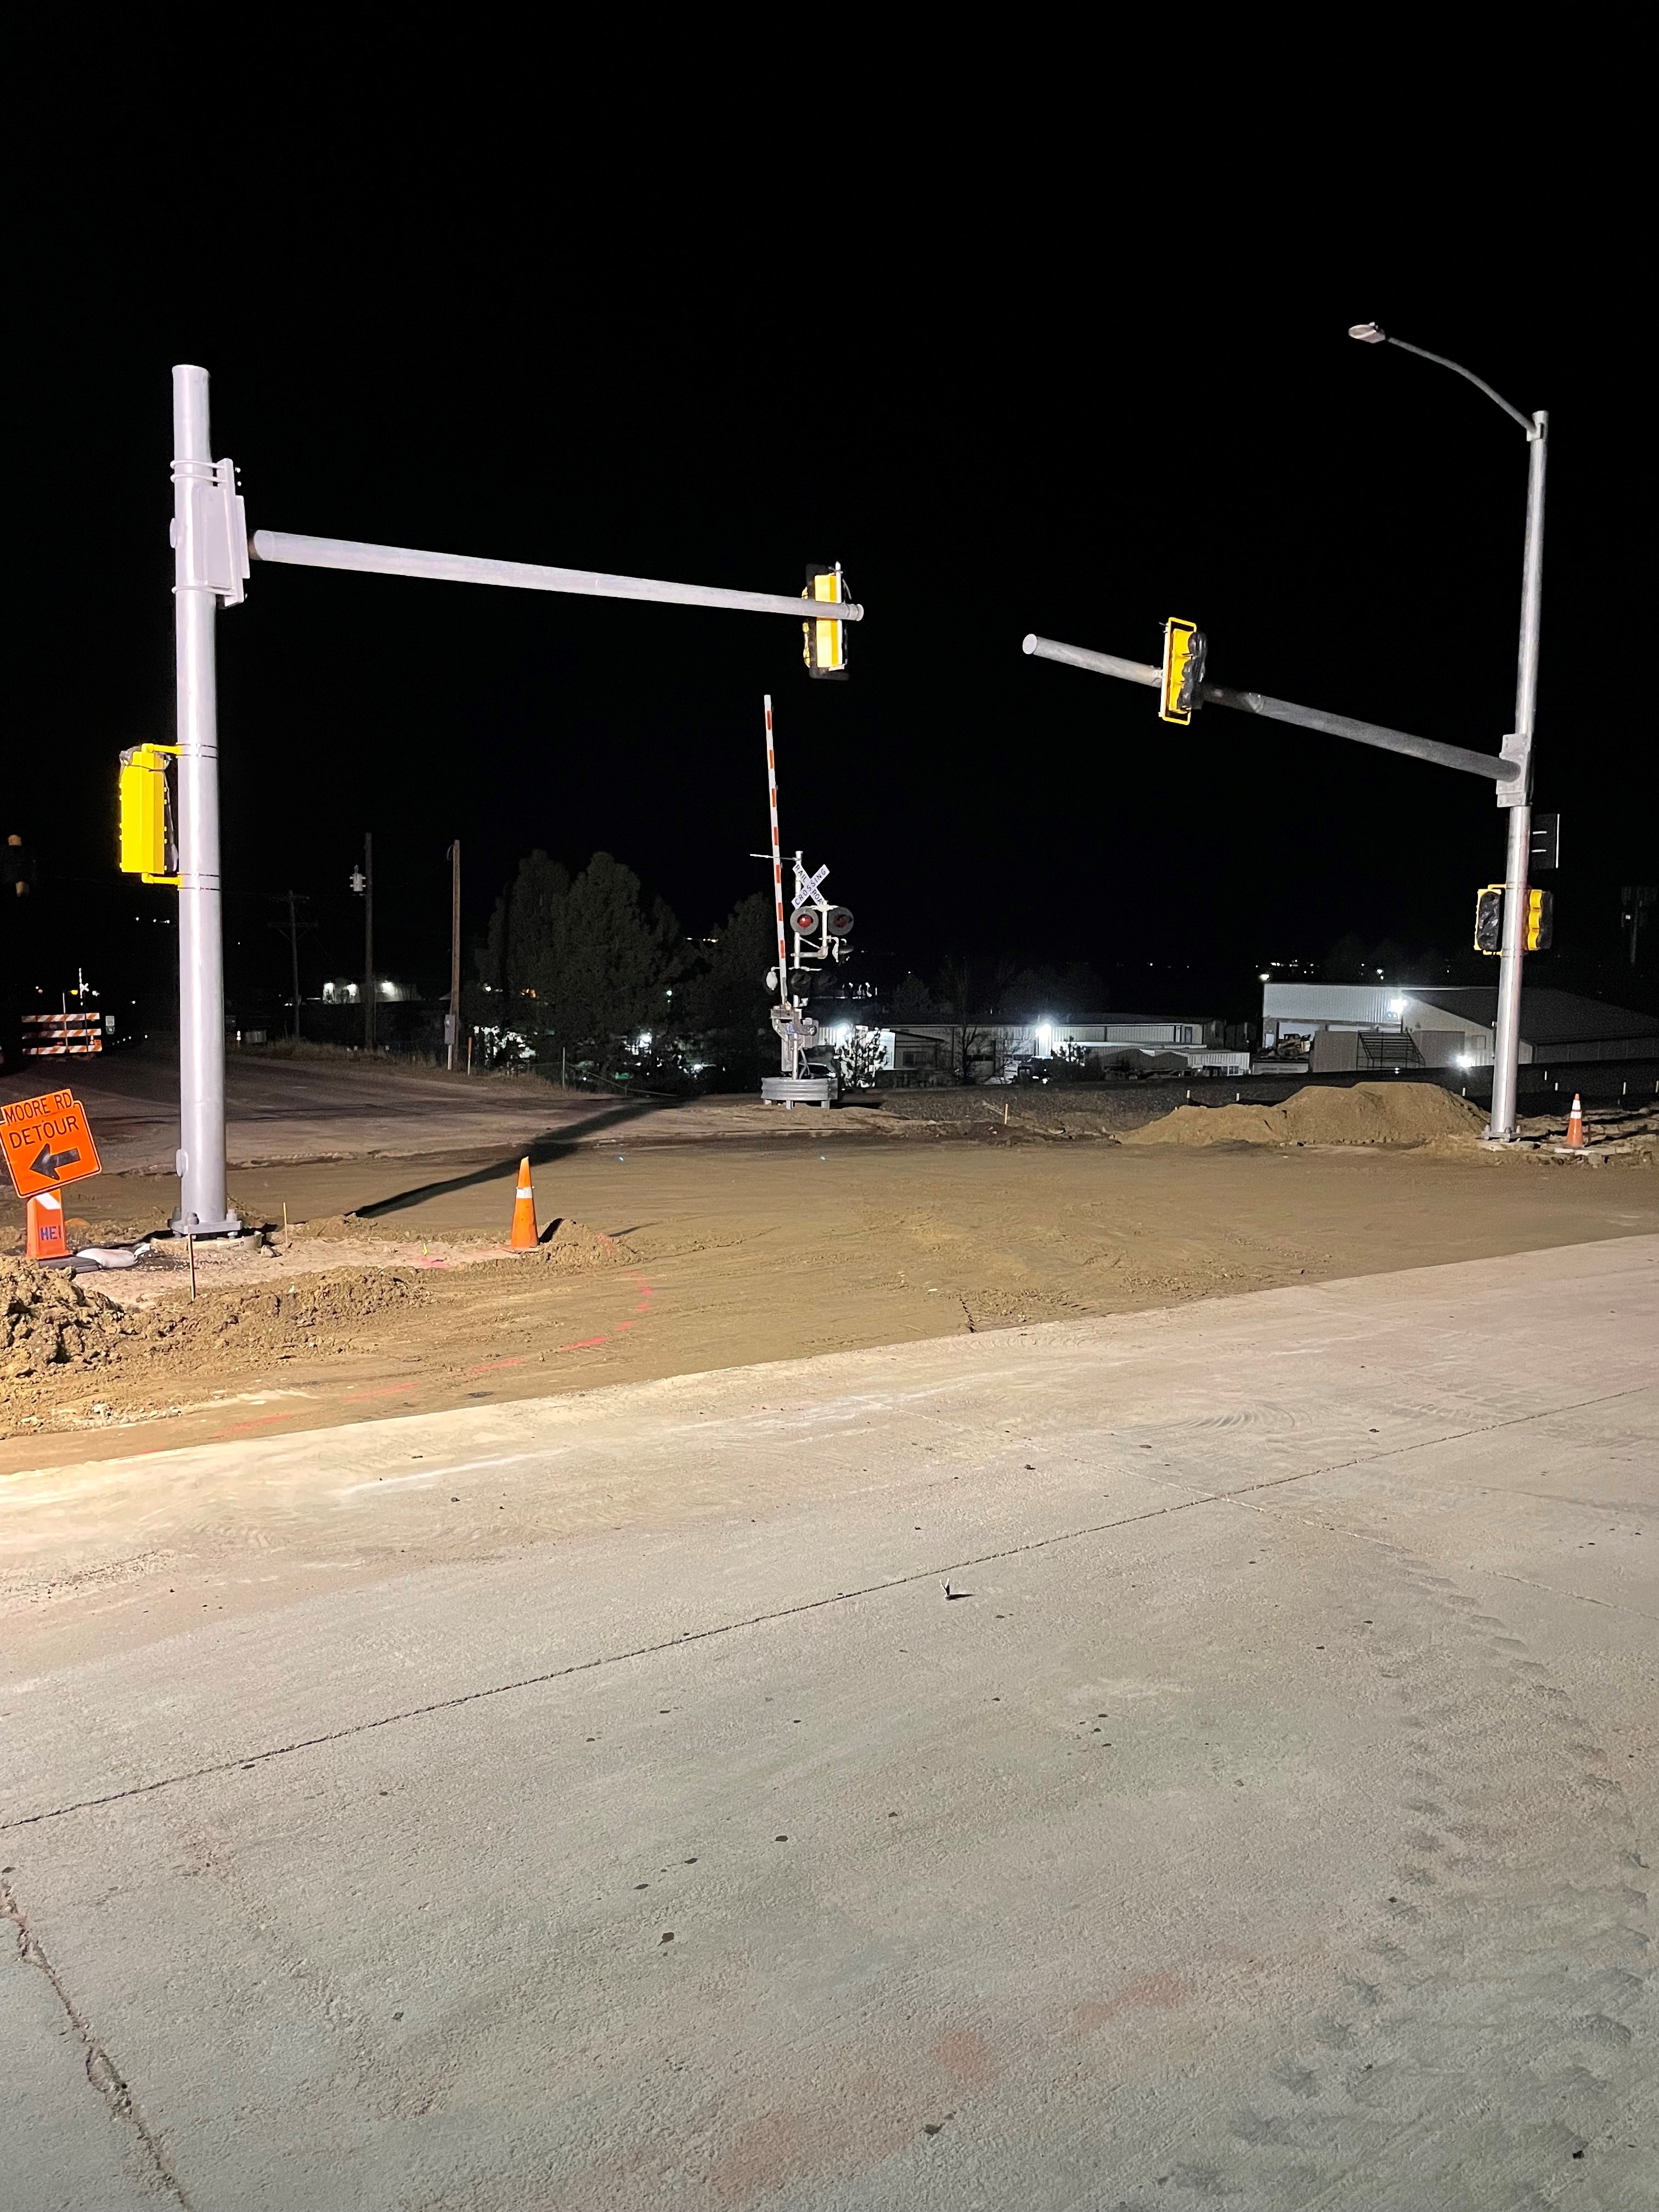 Night asphalt paving activities at Airport Road to reduce traffic impacts. May 6, 2022. detail image